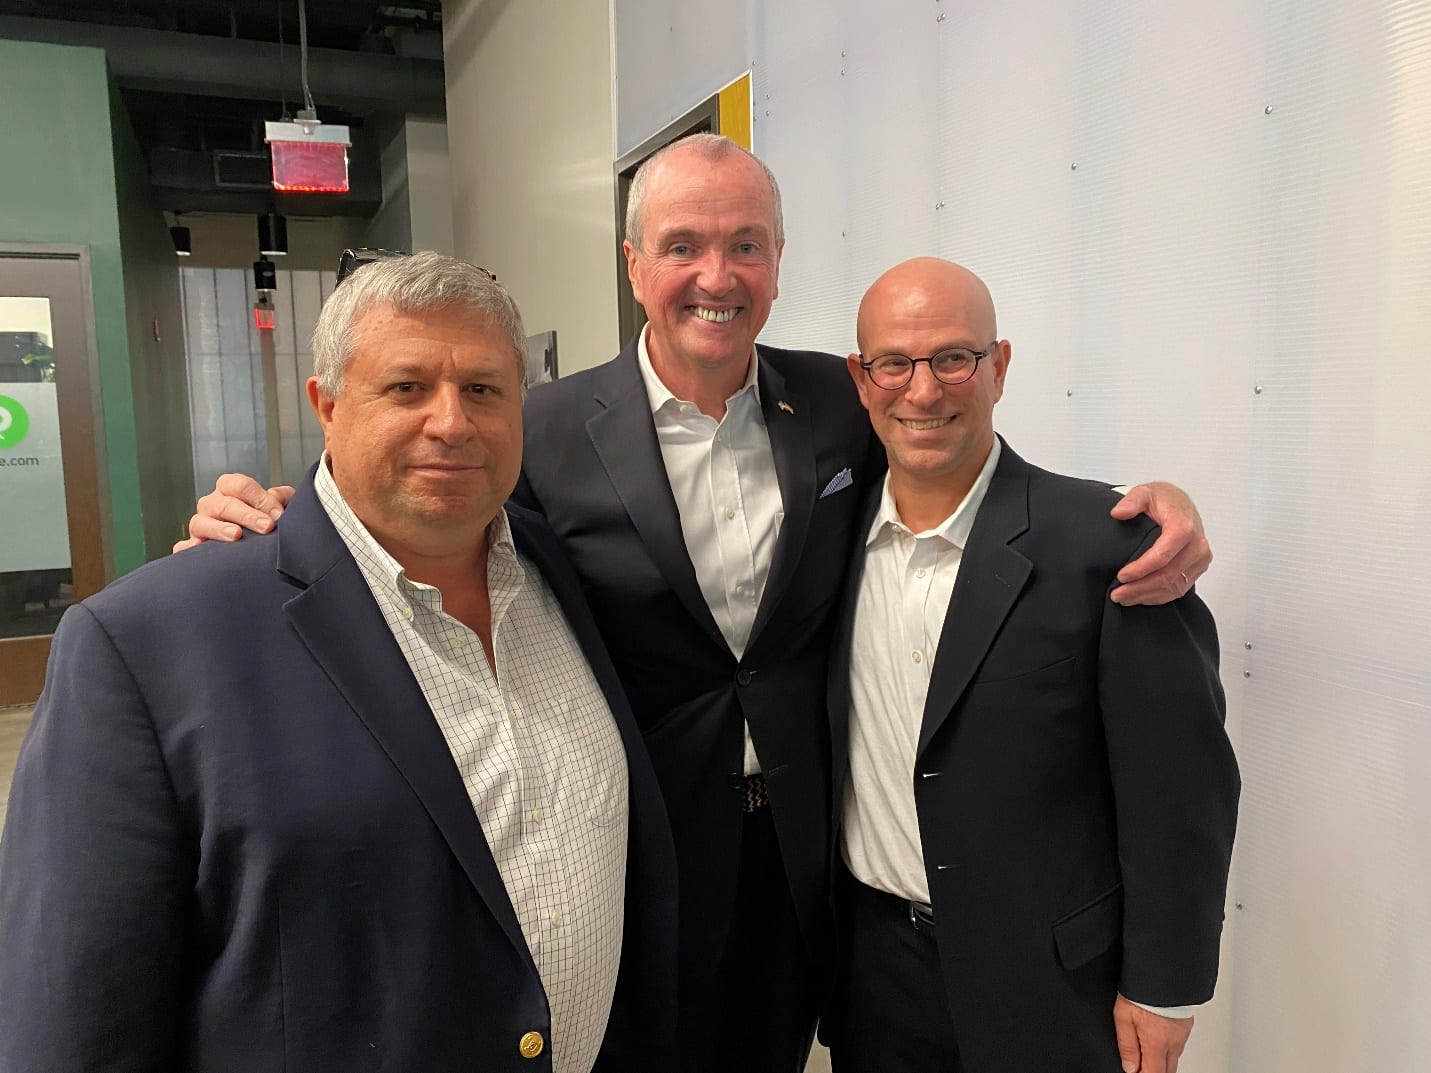 A Visit From New Jersey Governor Phil Murphy At Our Home Office